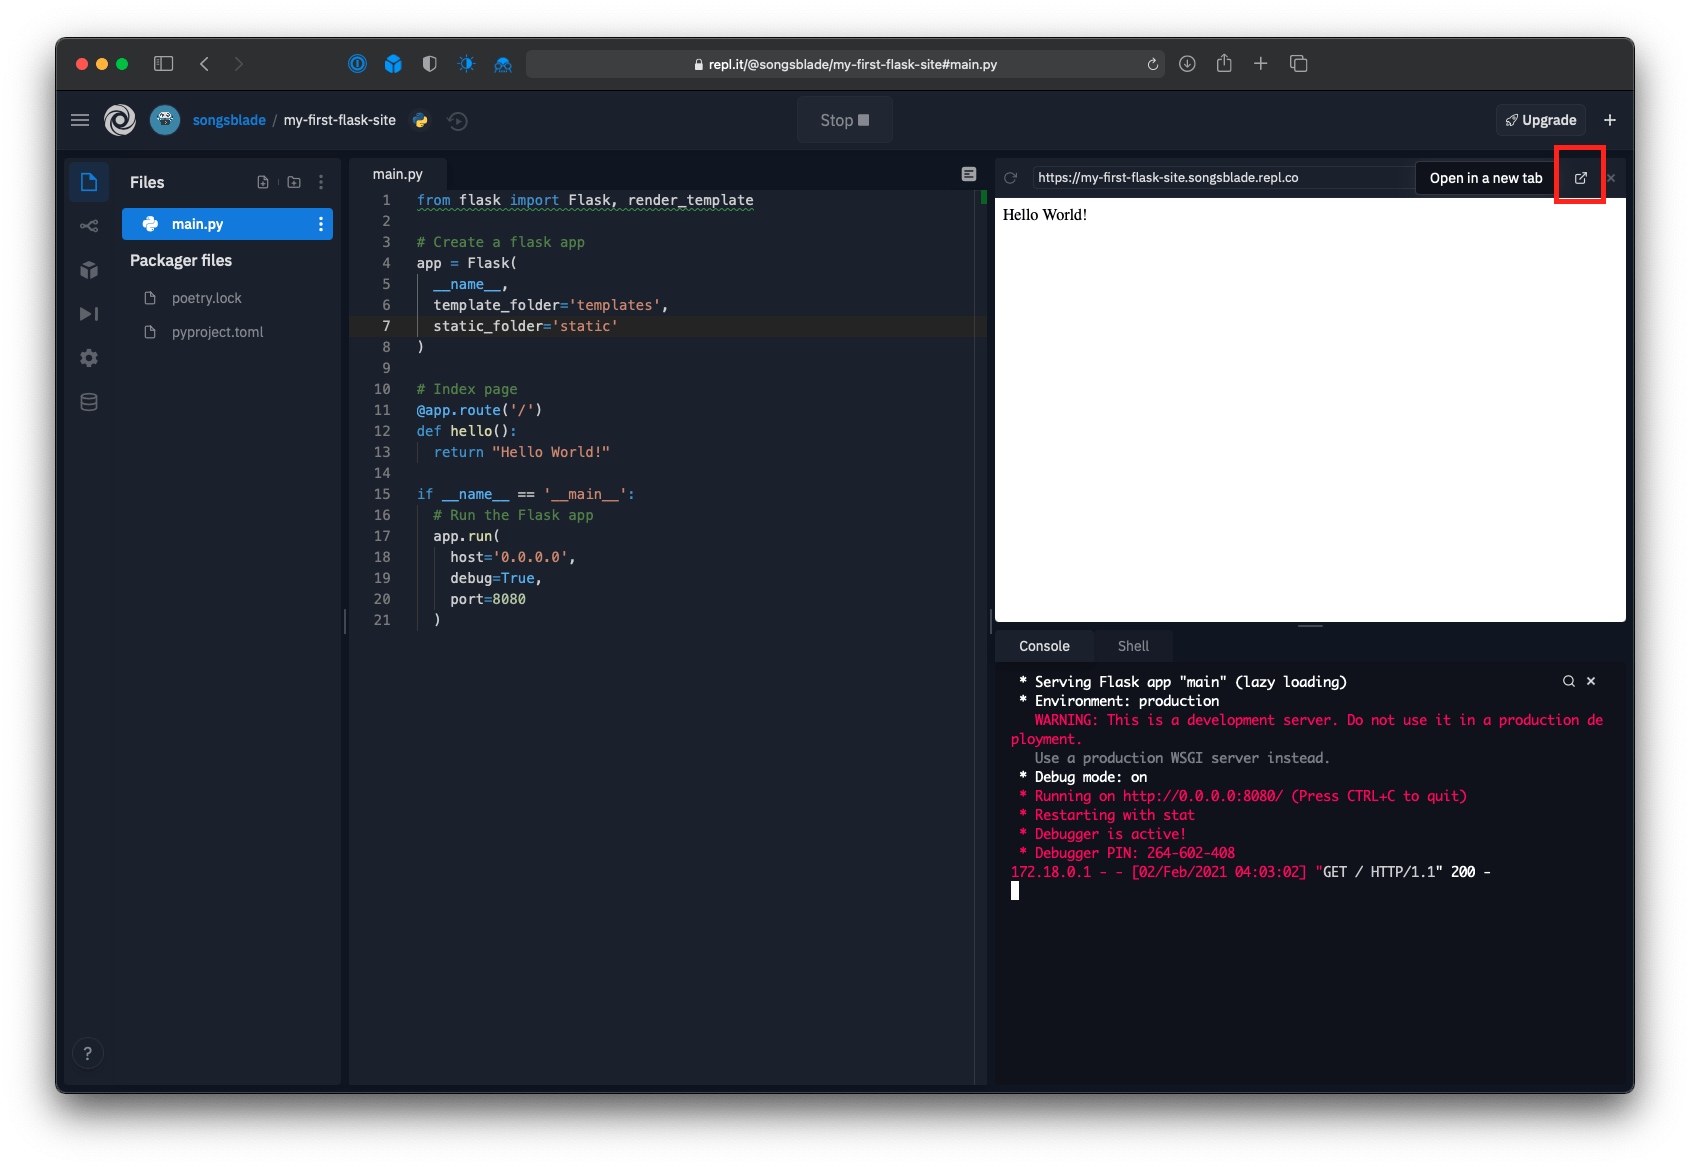 Repl editor with the "Open in a new tab" button highlighted